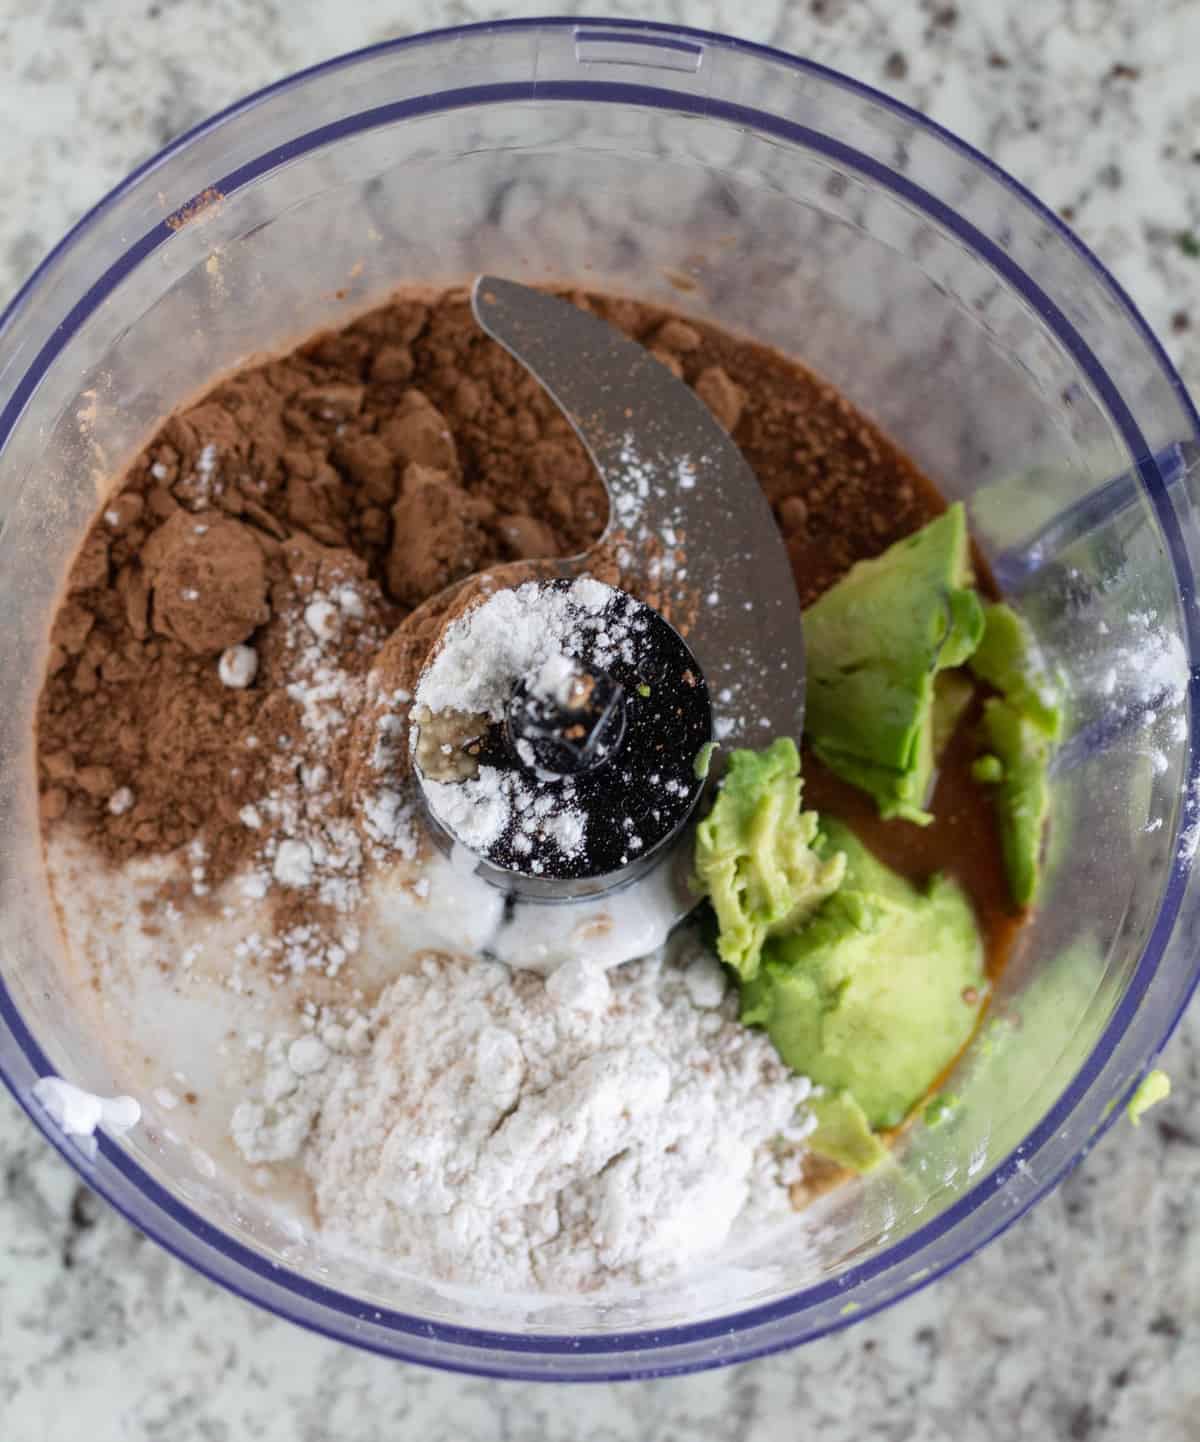 pudding ingredients in a food processor bowl